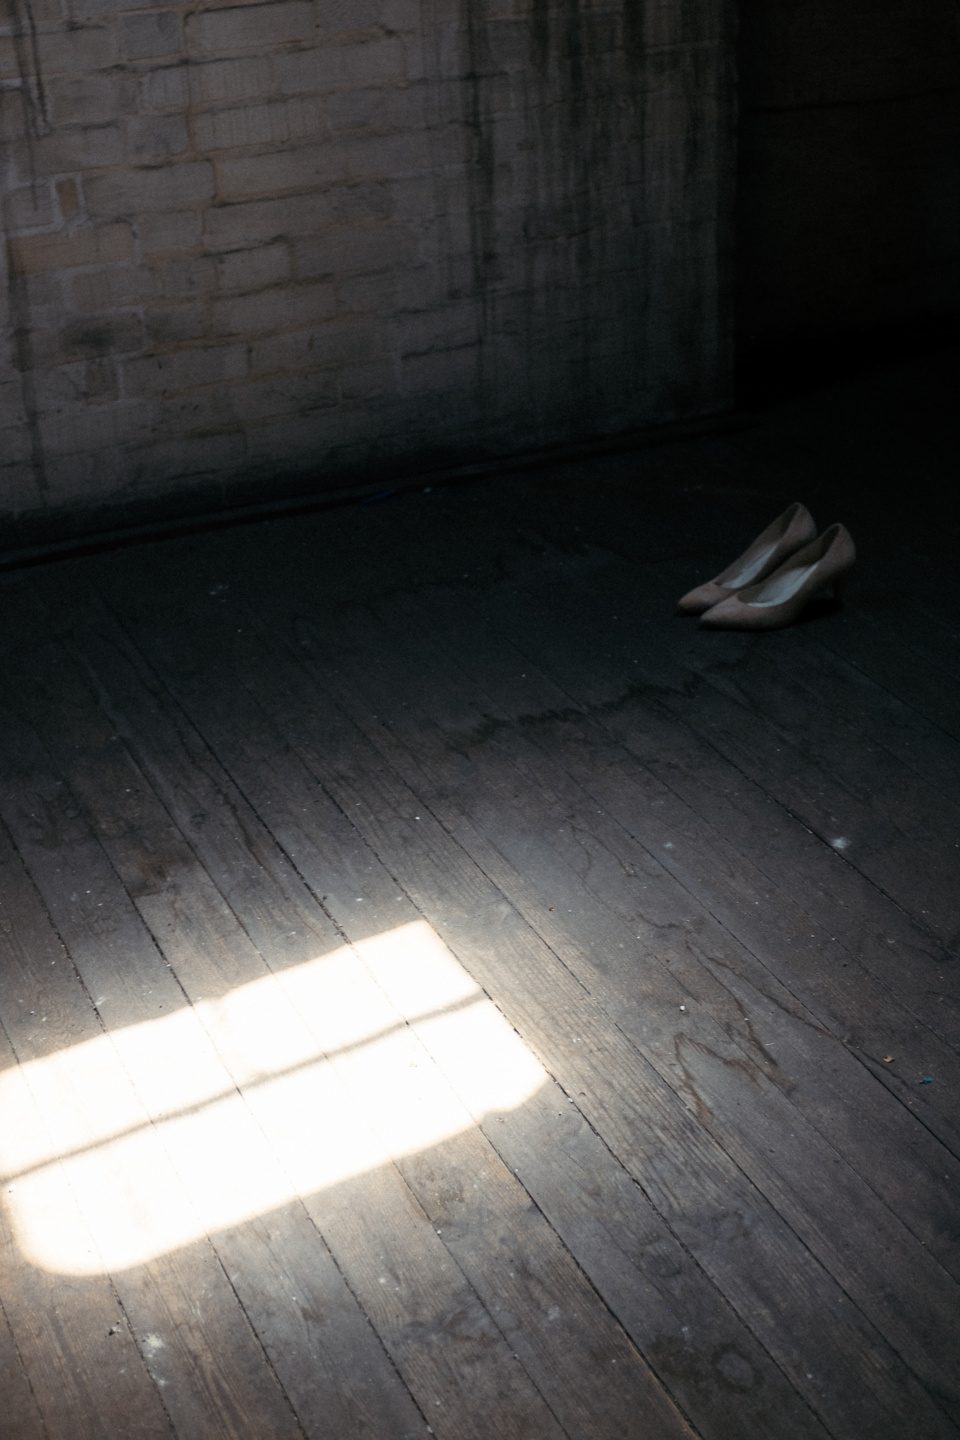 Shoes and light